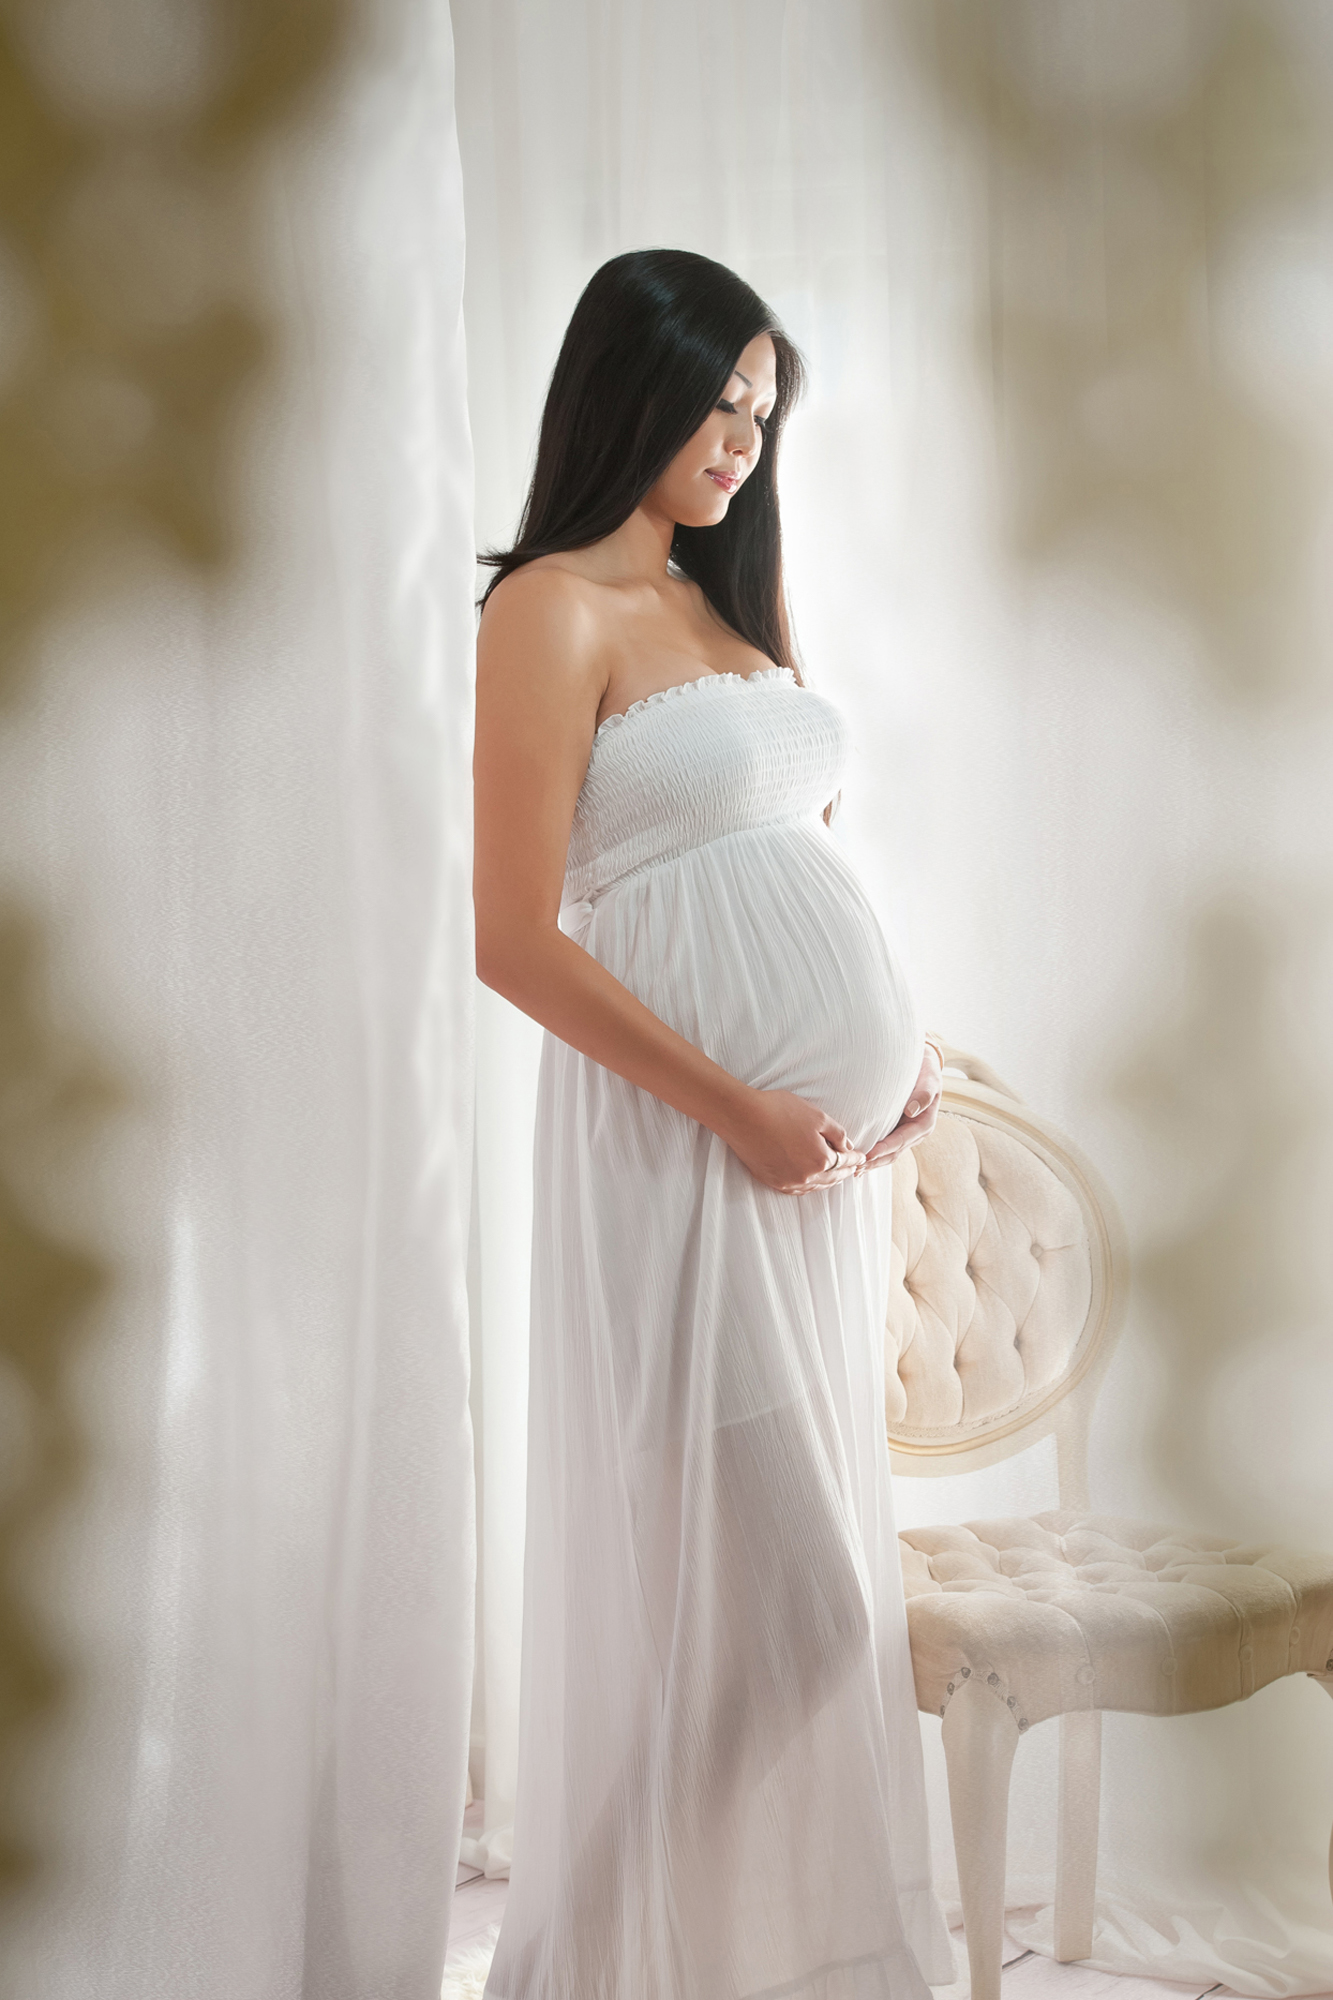 Best Maternity Photographer in South Jersey